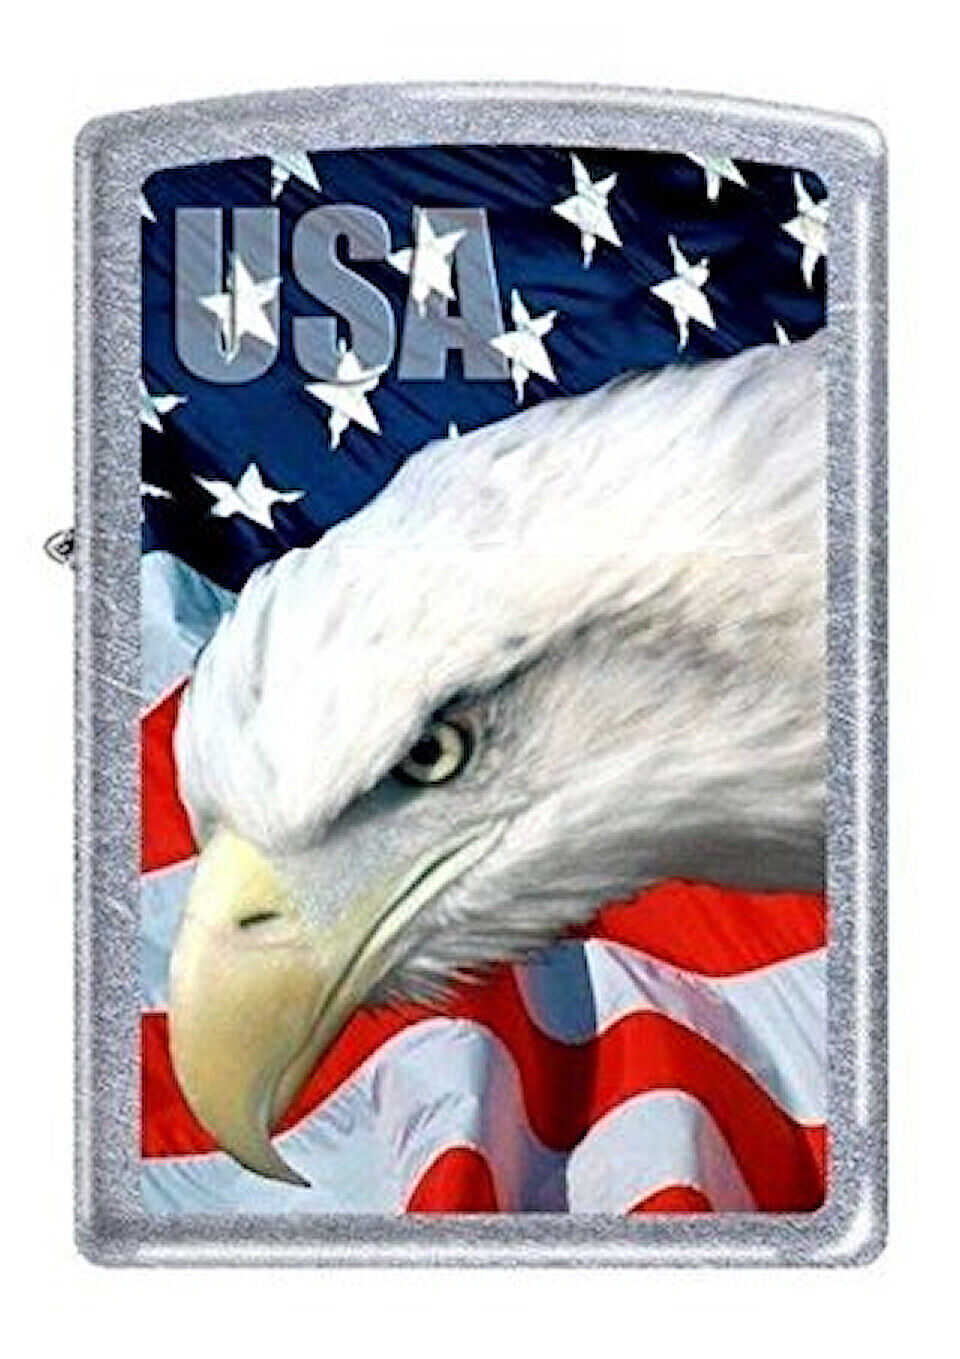 USA Eagle and Flag Zippo Lighter - New in Box